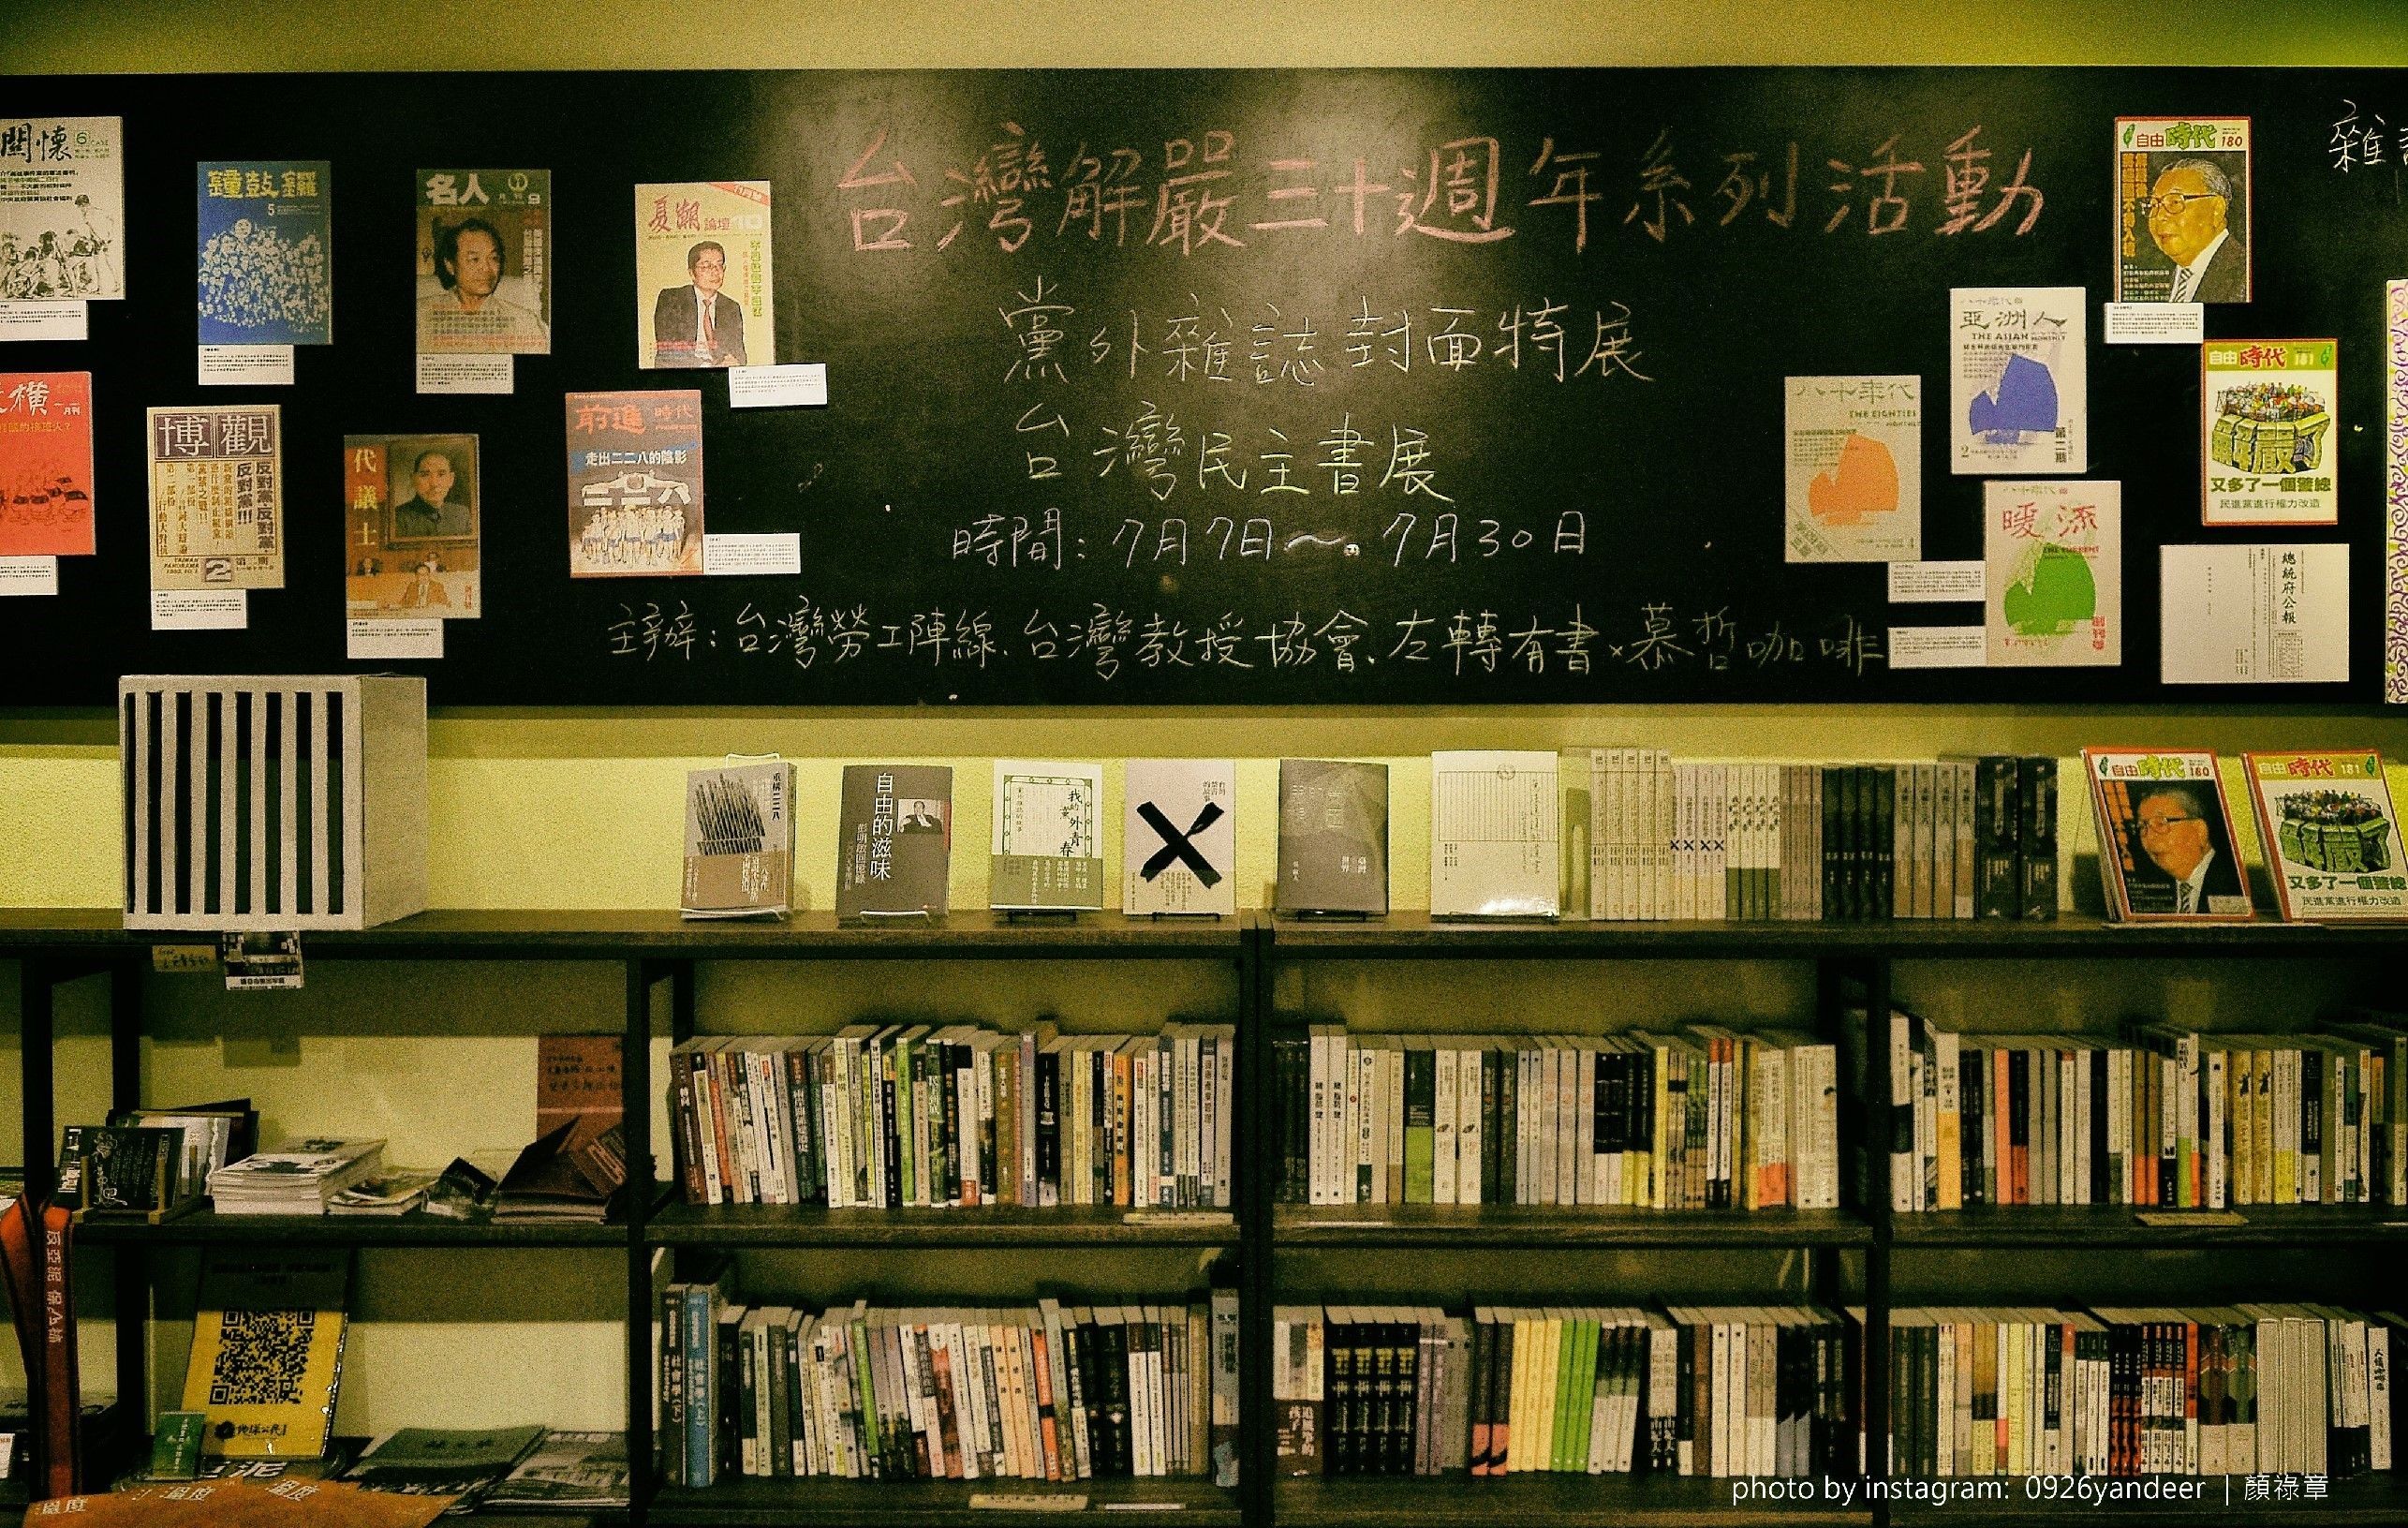 An exhibition at a Taipei bookstore shows once banned publications, reminders of the years before Taiwan became a democracy with a sometimes contentious legislature. Image by Yan Luzhang (@0926yandeer). Taiwan, 2017.